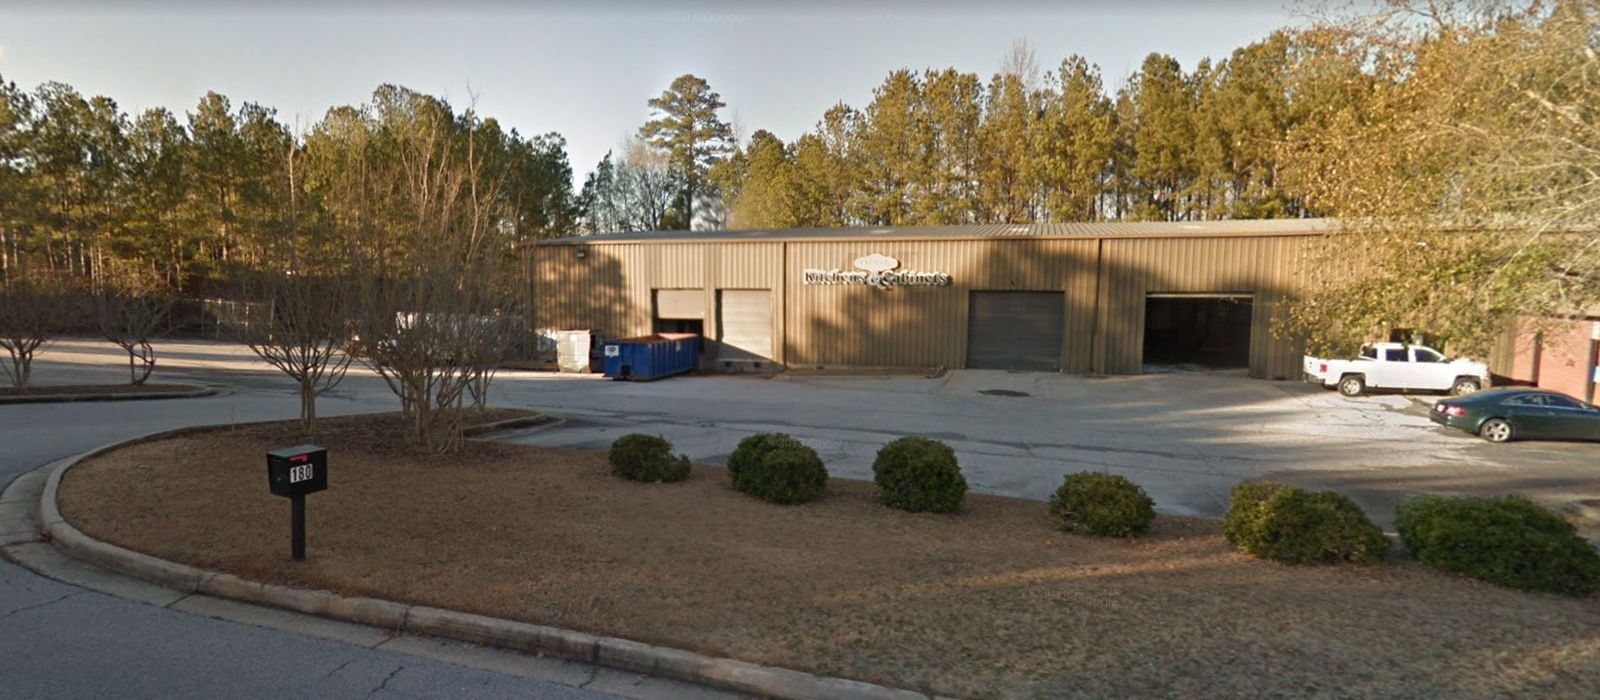 Fayetteville Location Image